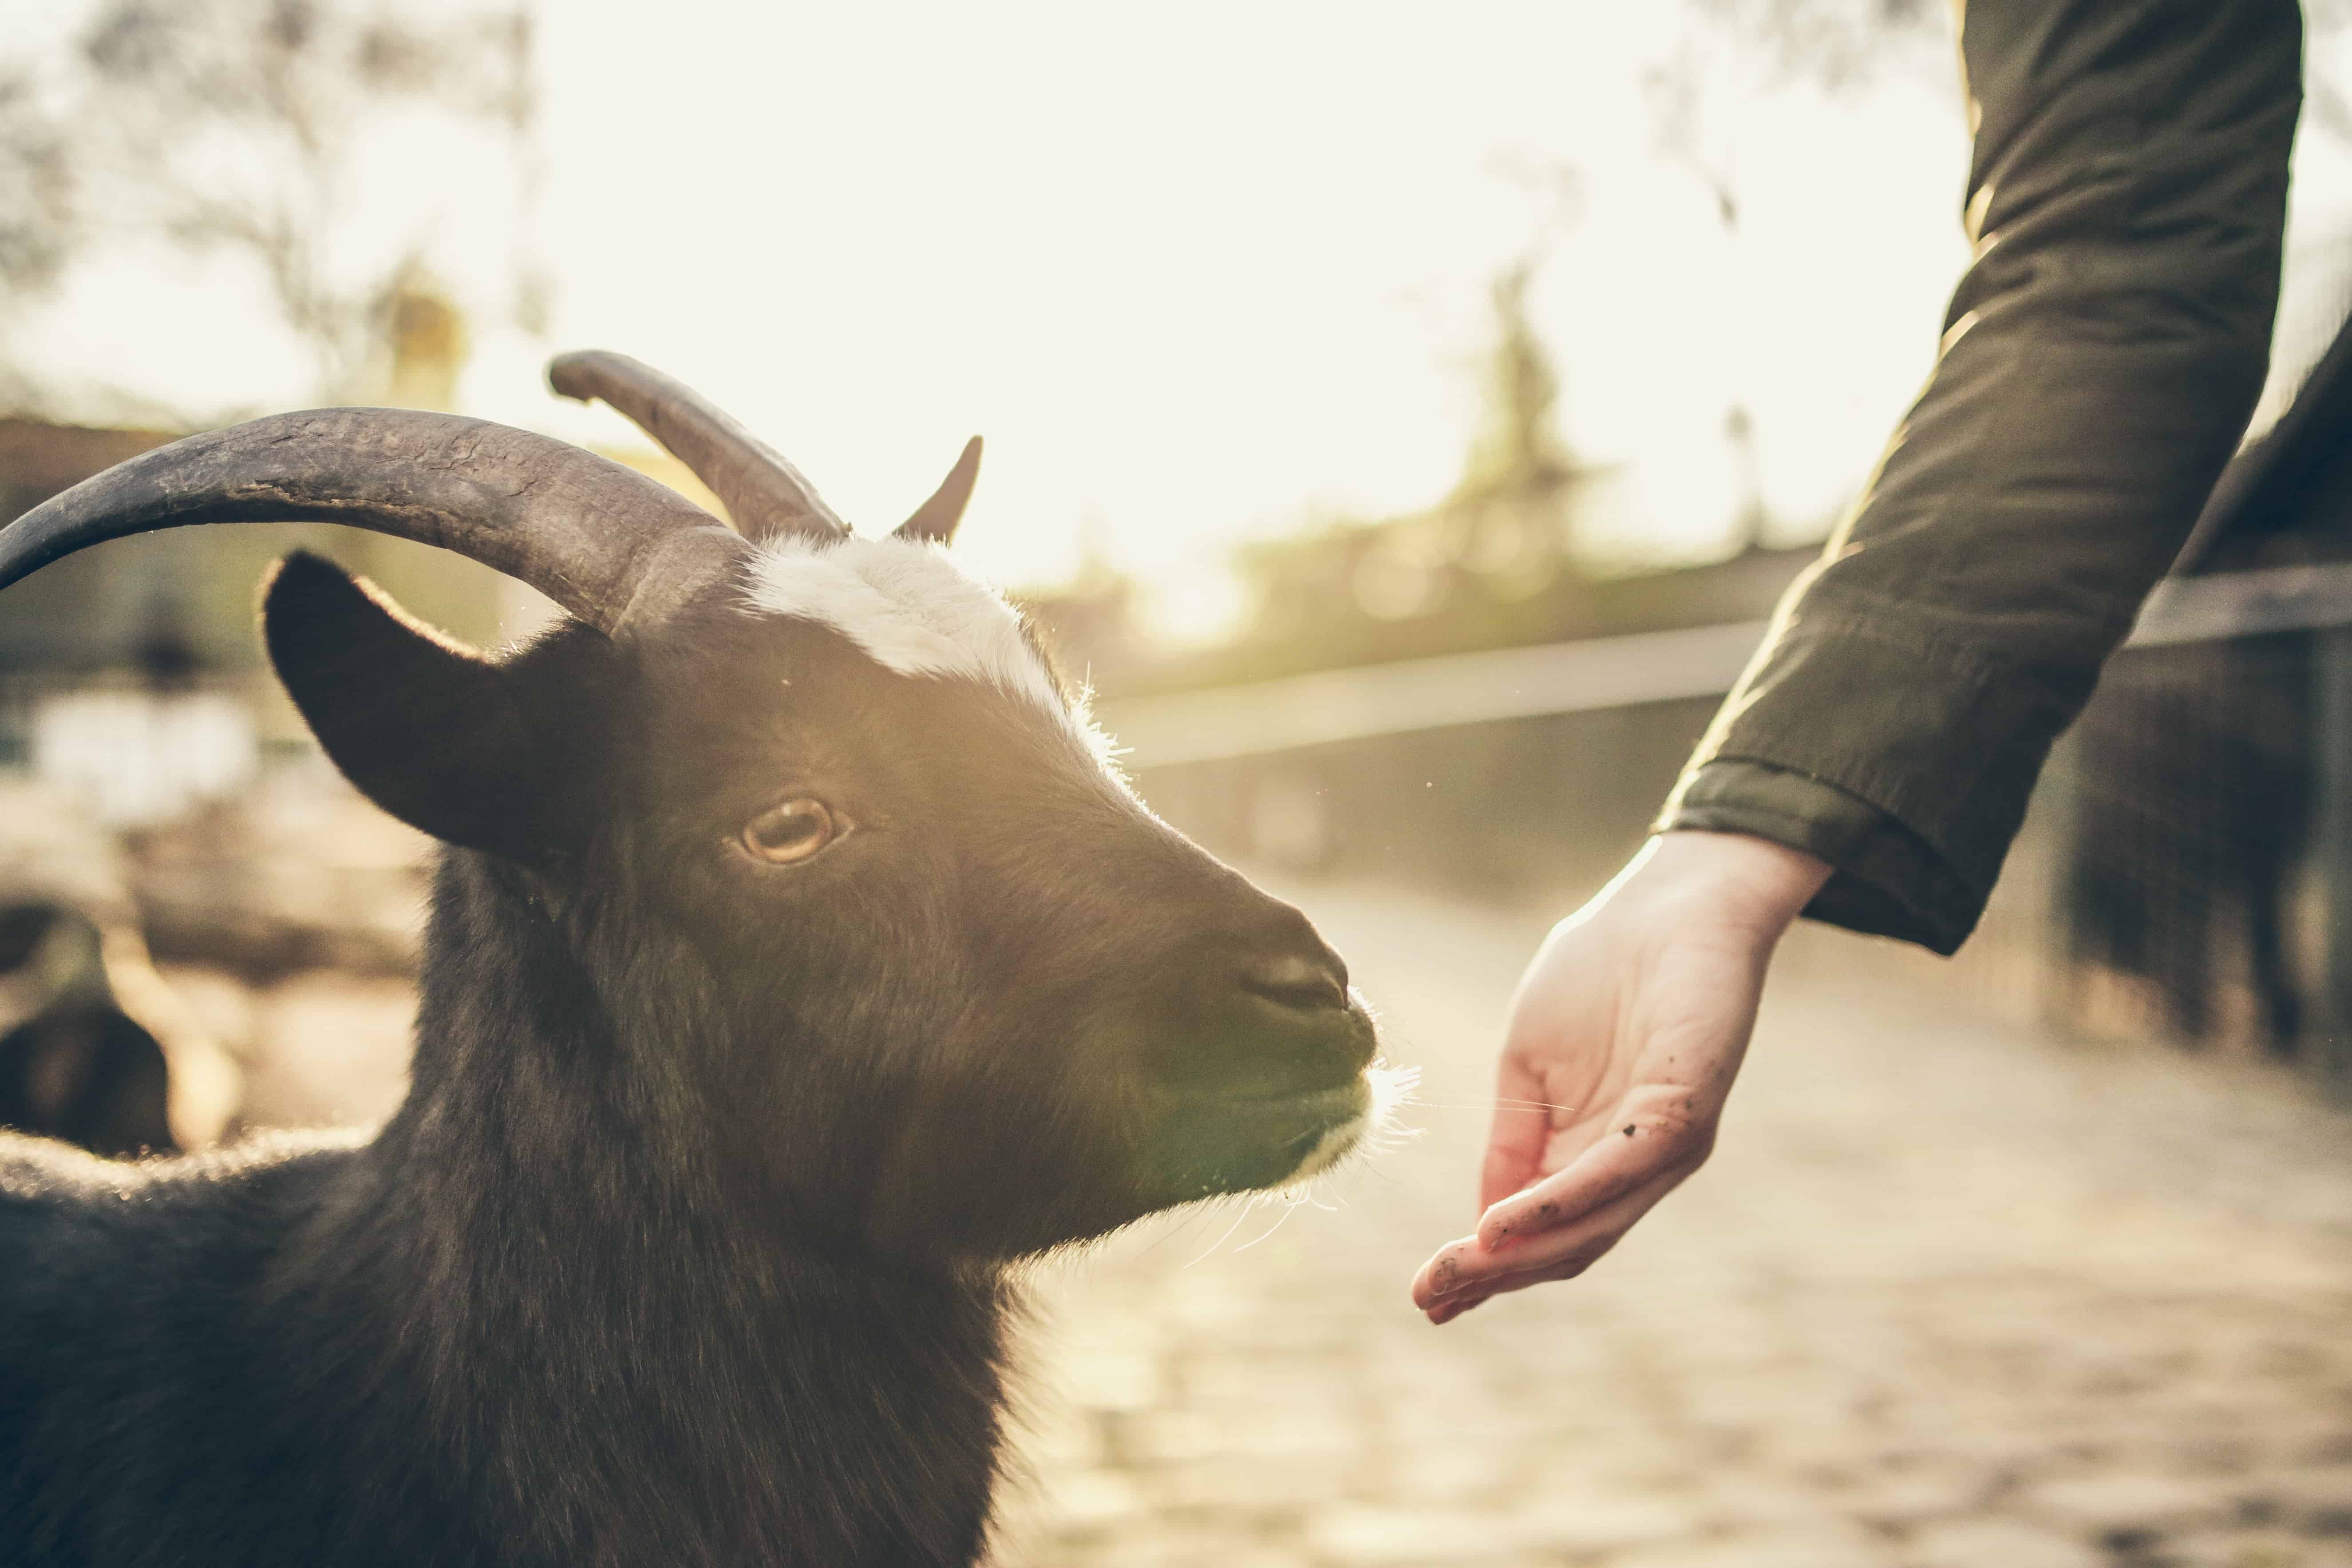 A person offering a young goat their hand.